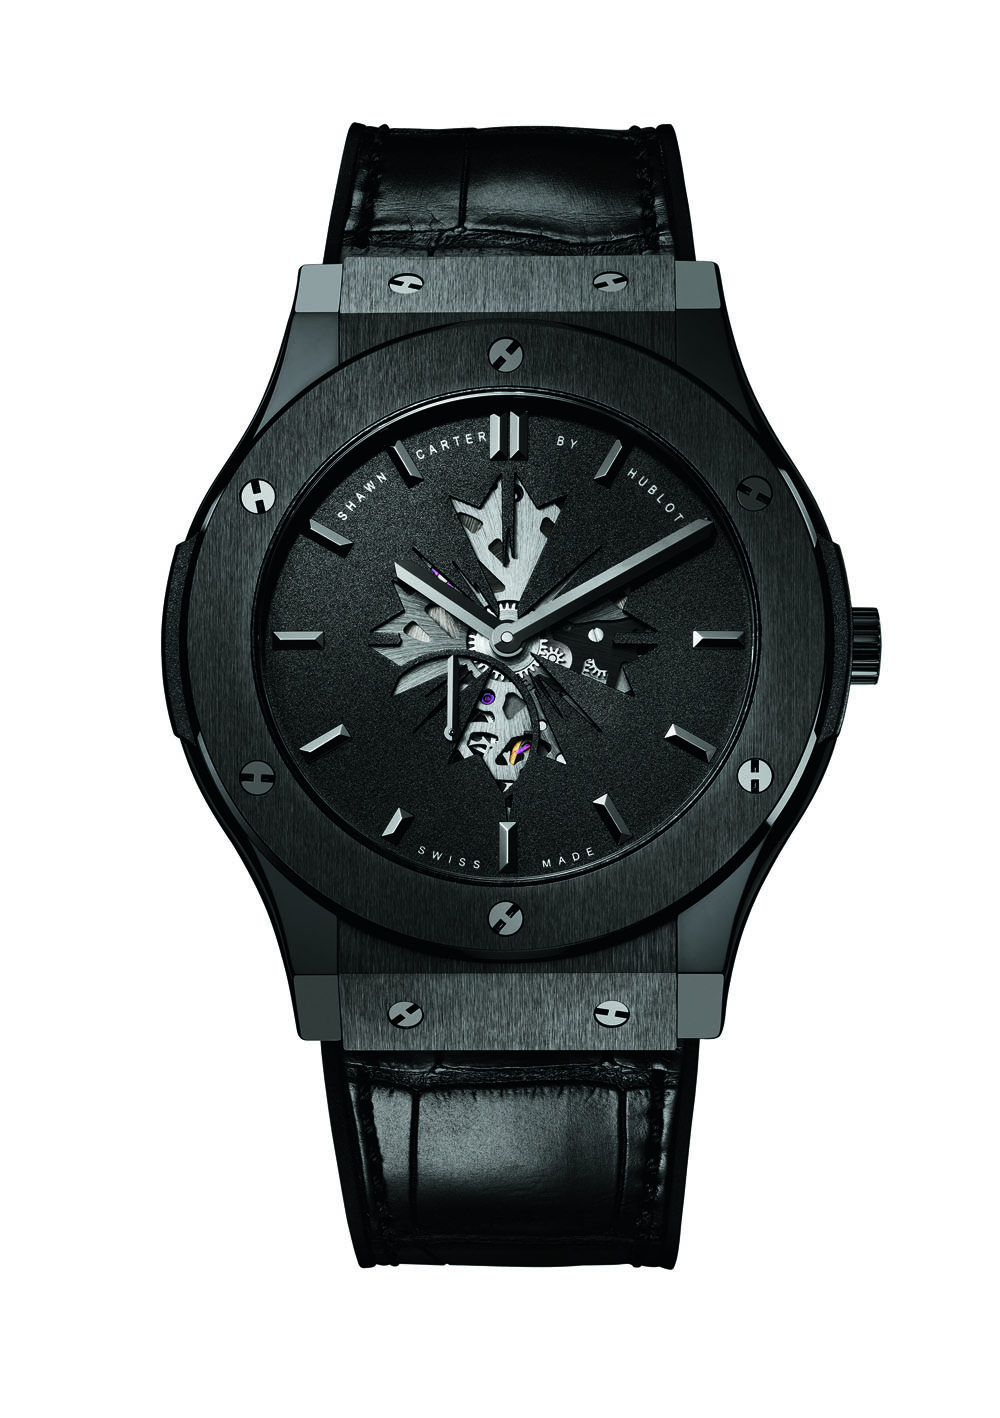 Jay Z Hosts World Preview of Shawn Carter Watches by Hublot in ...